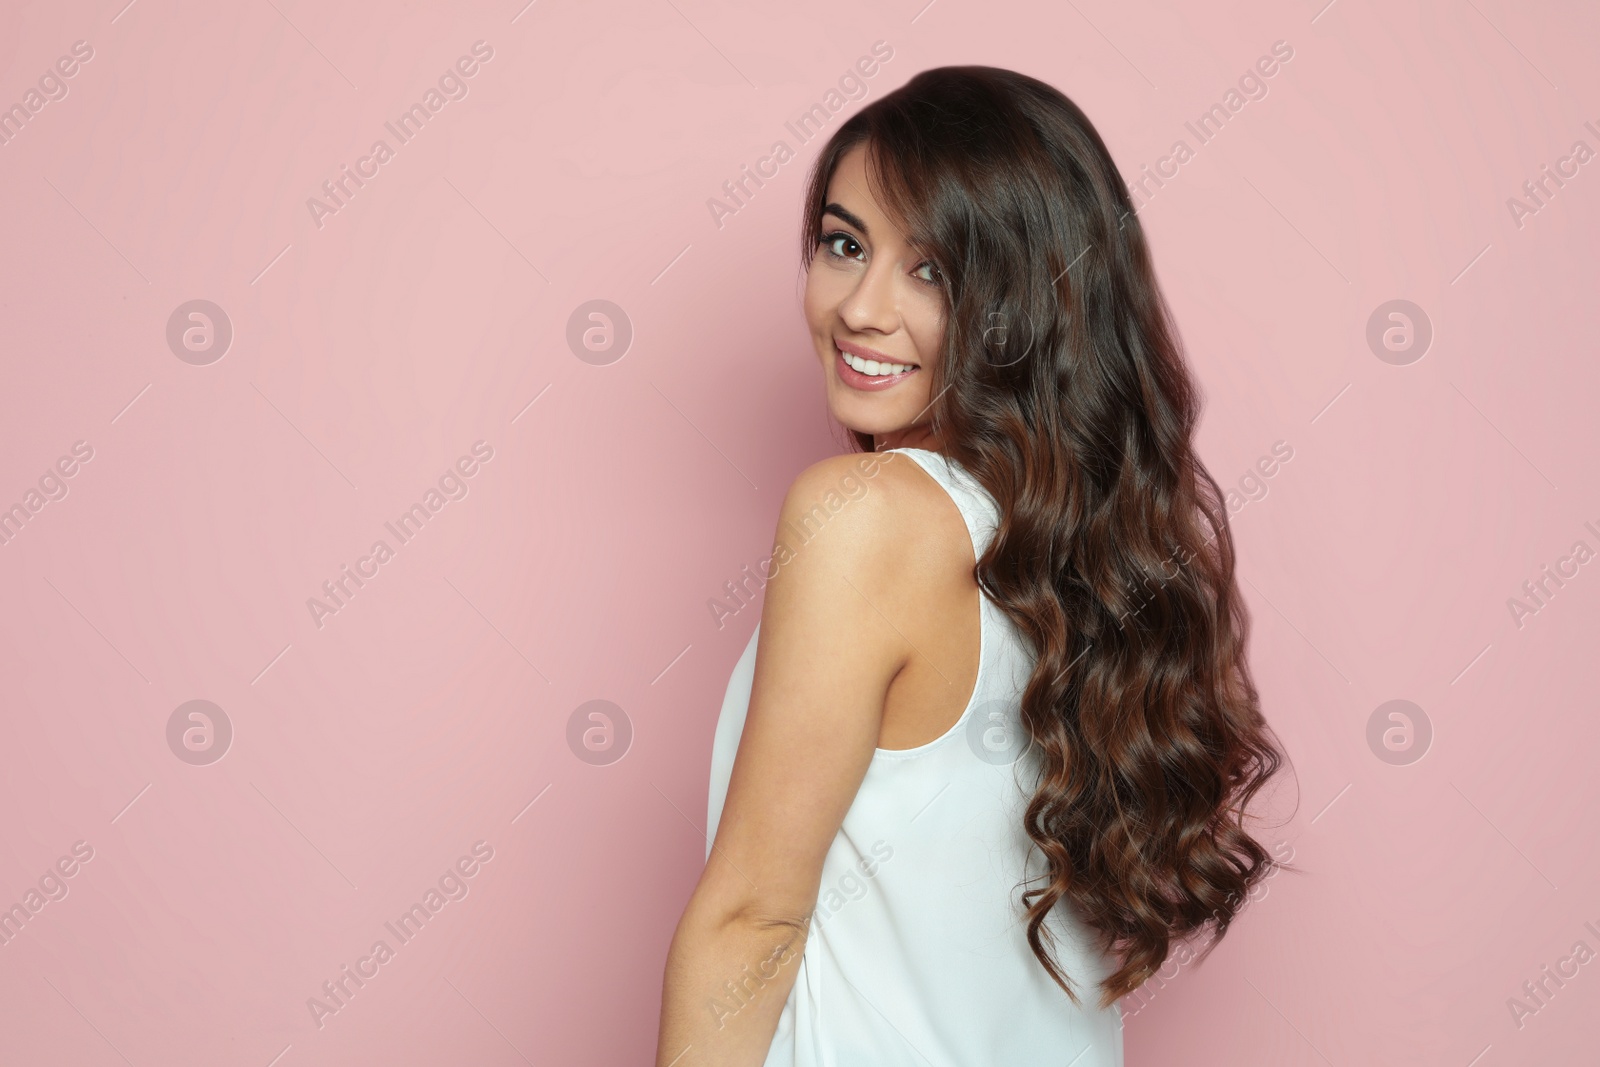 Photo of Beautiful woman with shiny wavy hair on color background